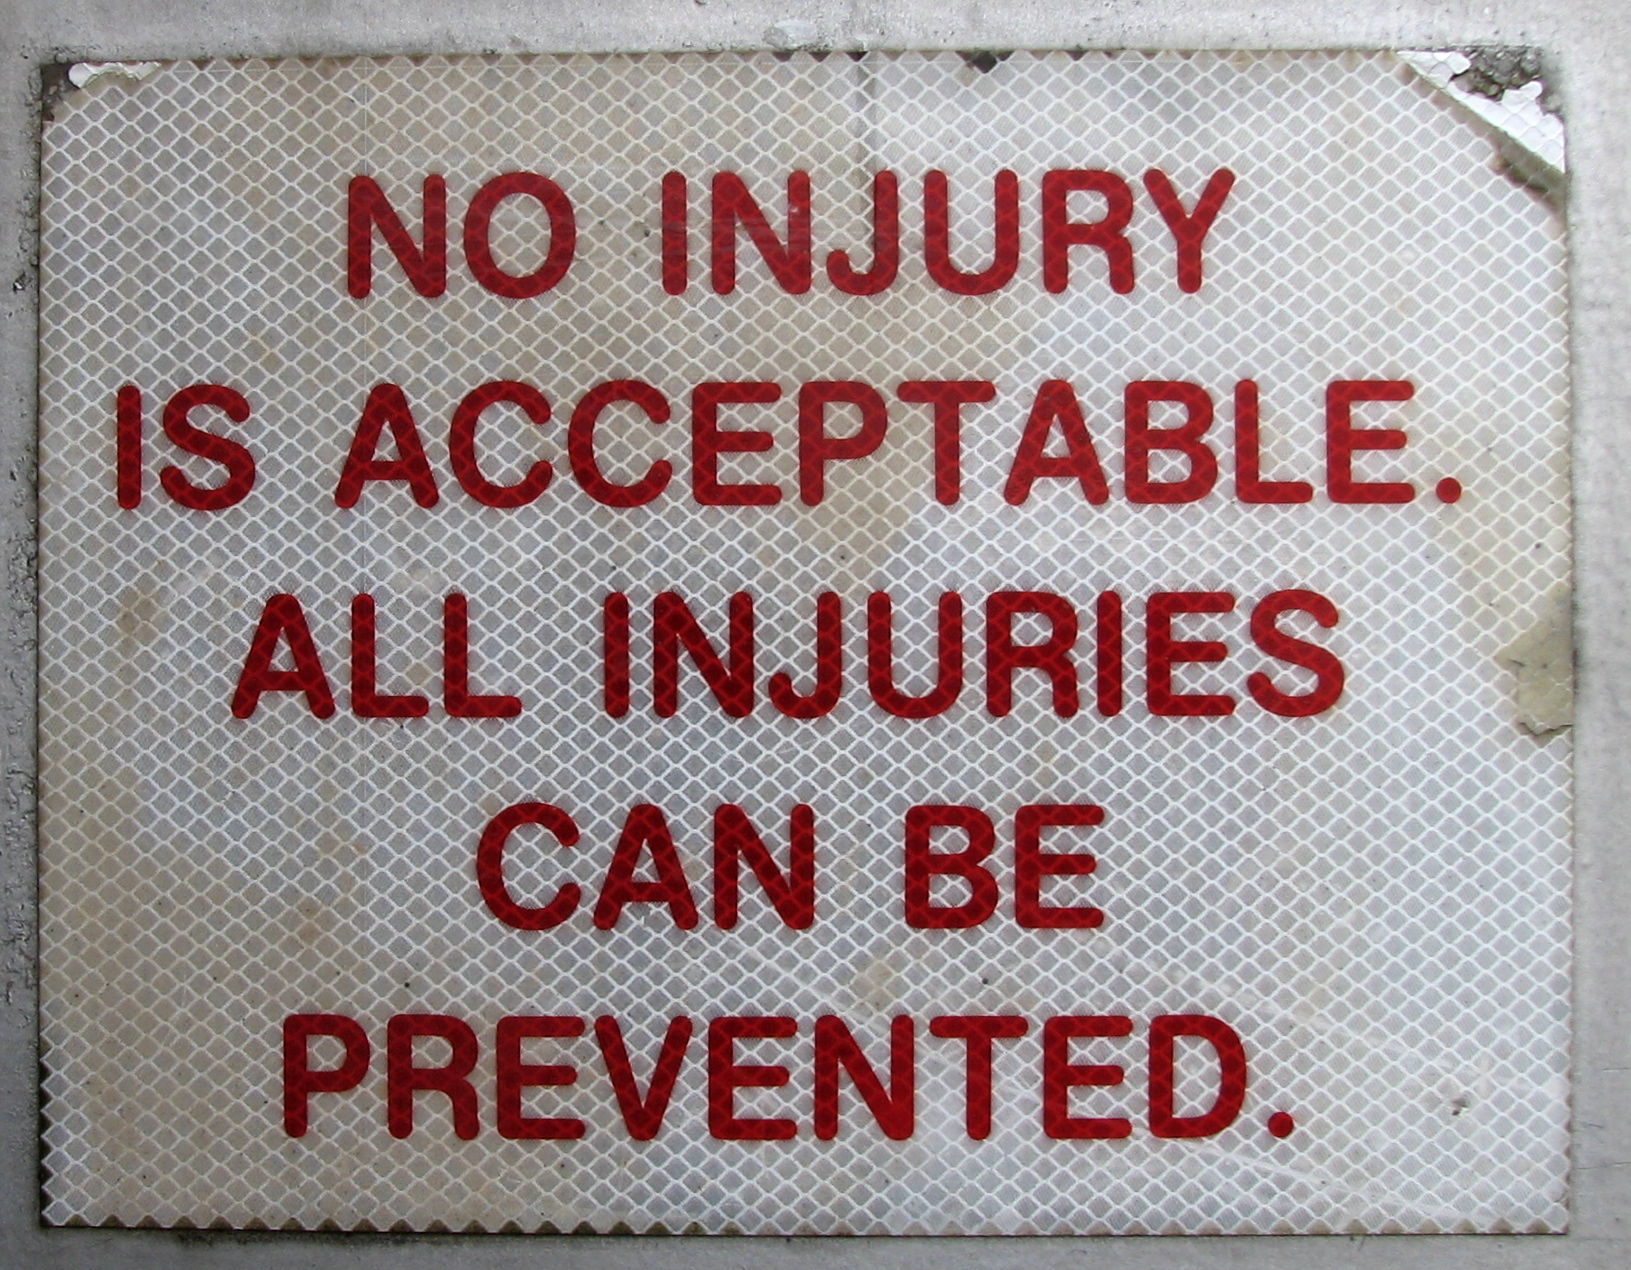 2006-07-26 - 10 -  Road Trip - Day 03 - United States - Illinois - Union - Illinois Railway Museum - No Injury is Acceptable - All Injuries Can be Prevented - Sign